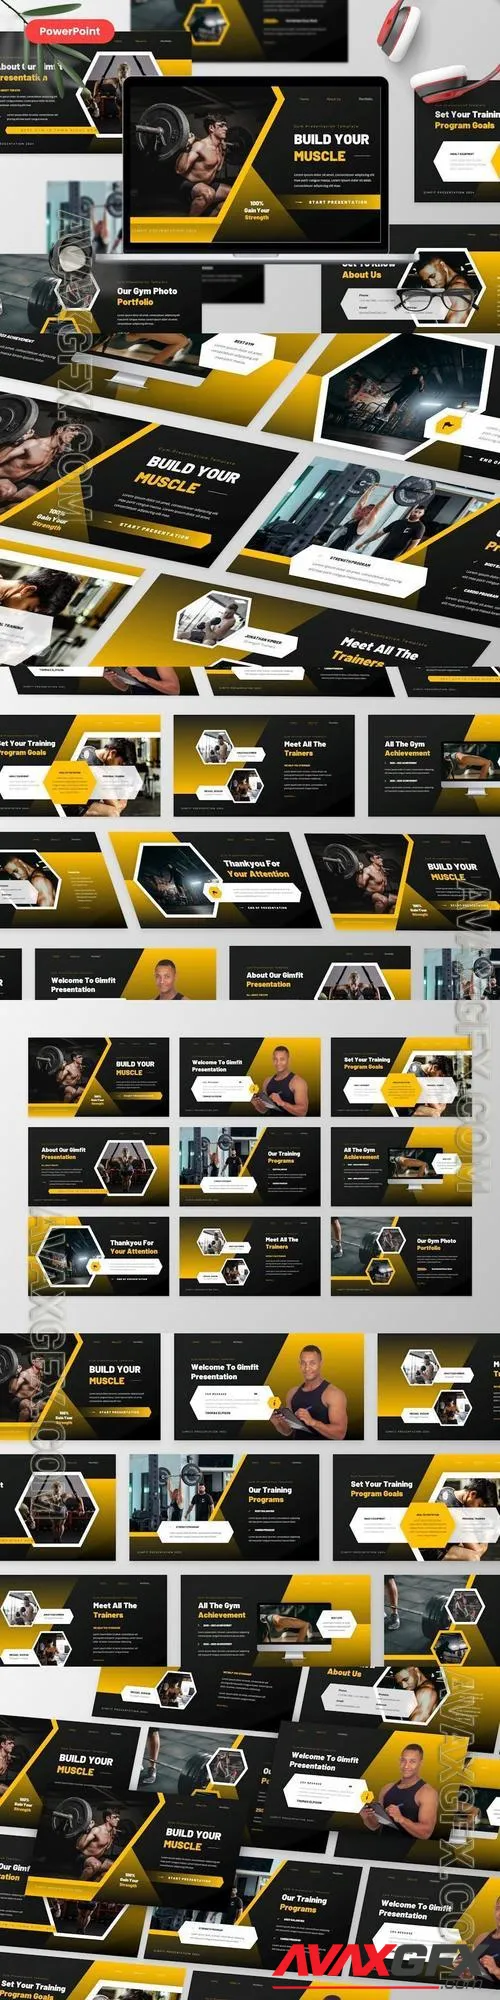 Gimfit - Gym PowerPoint Template